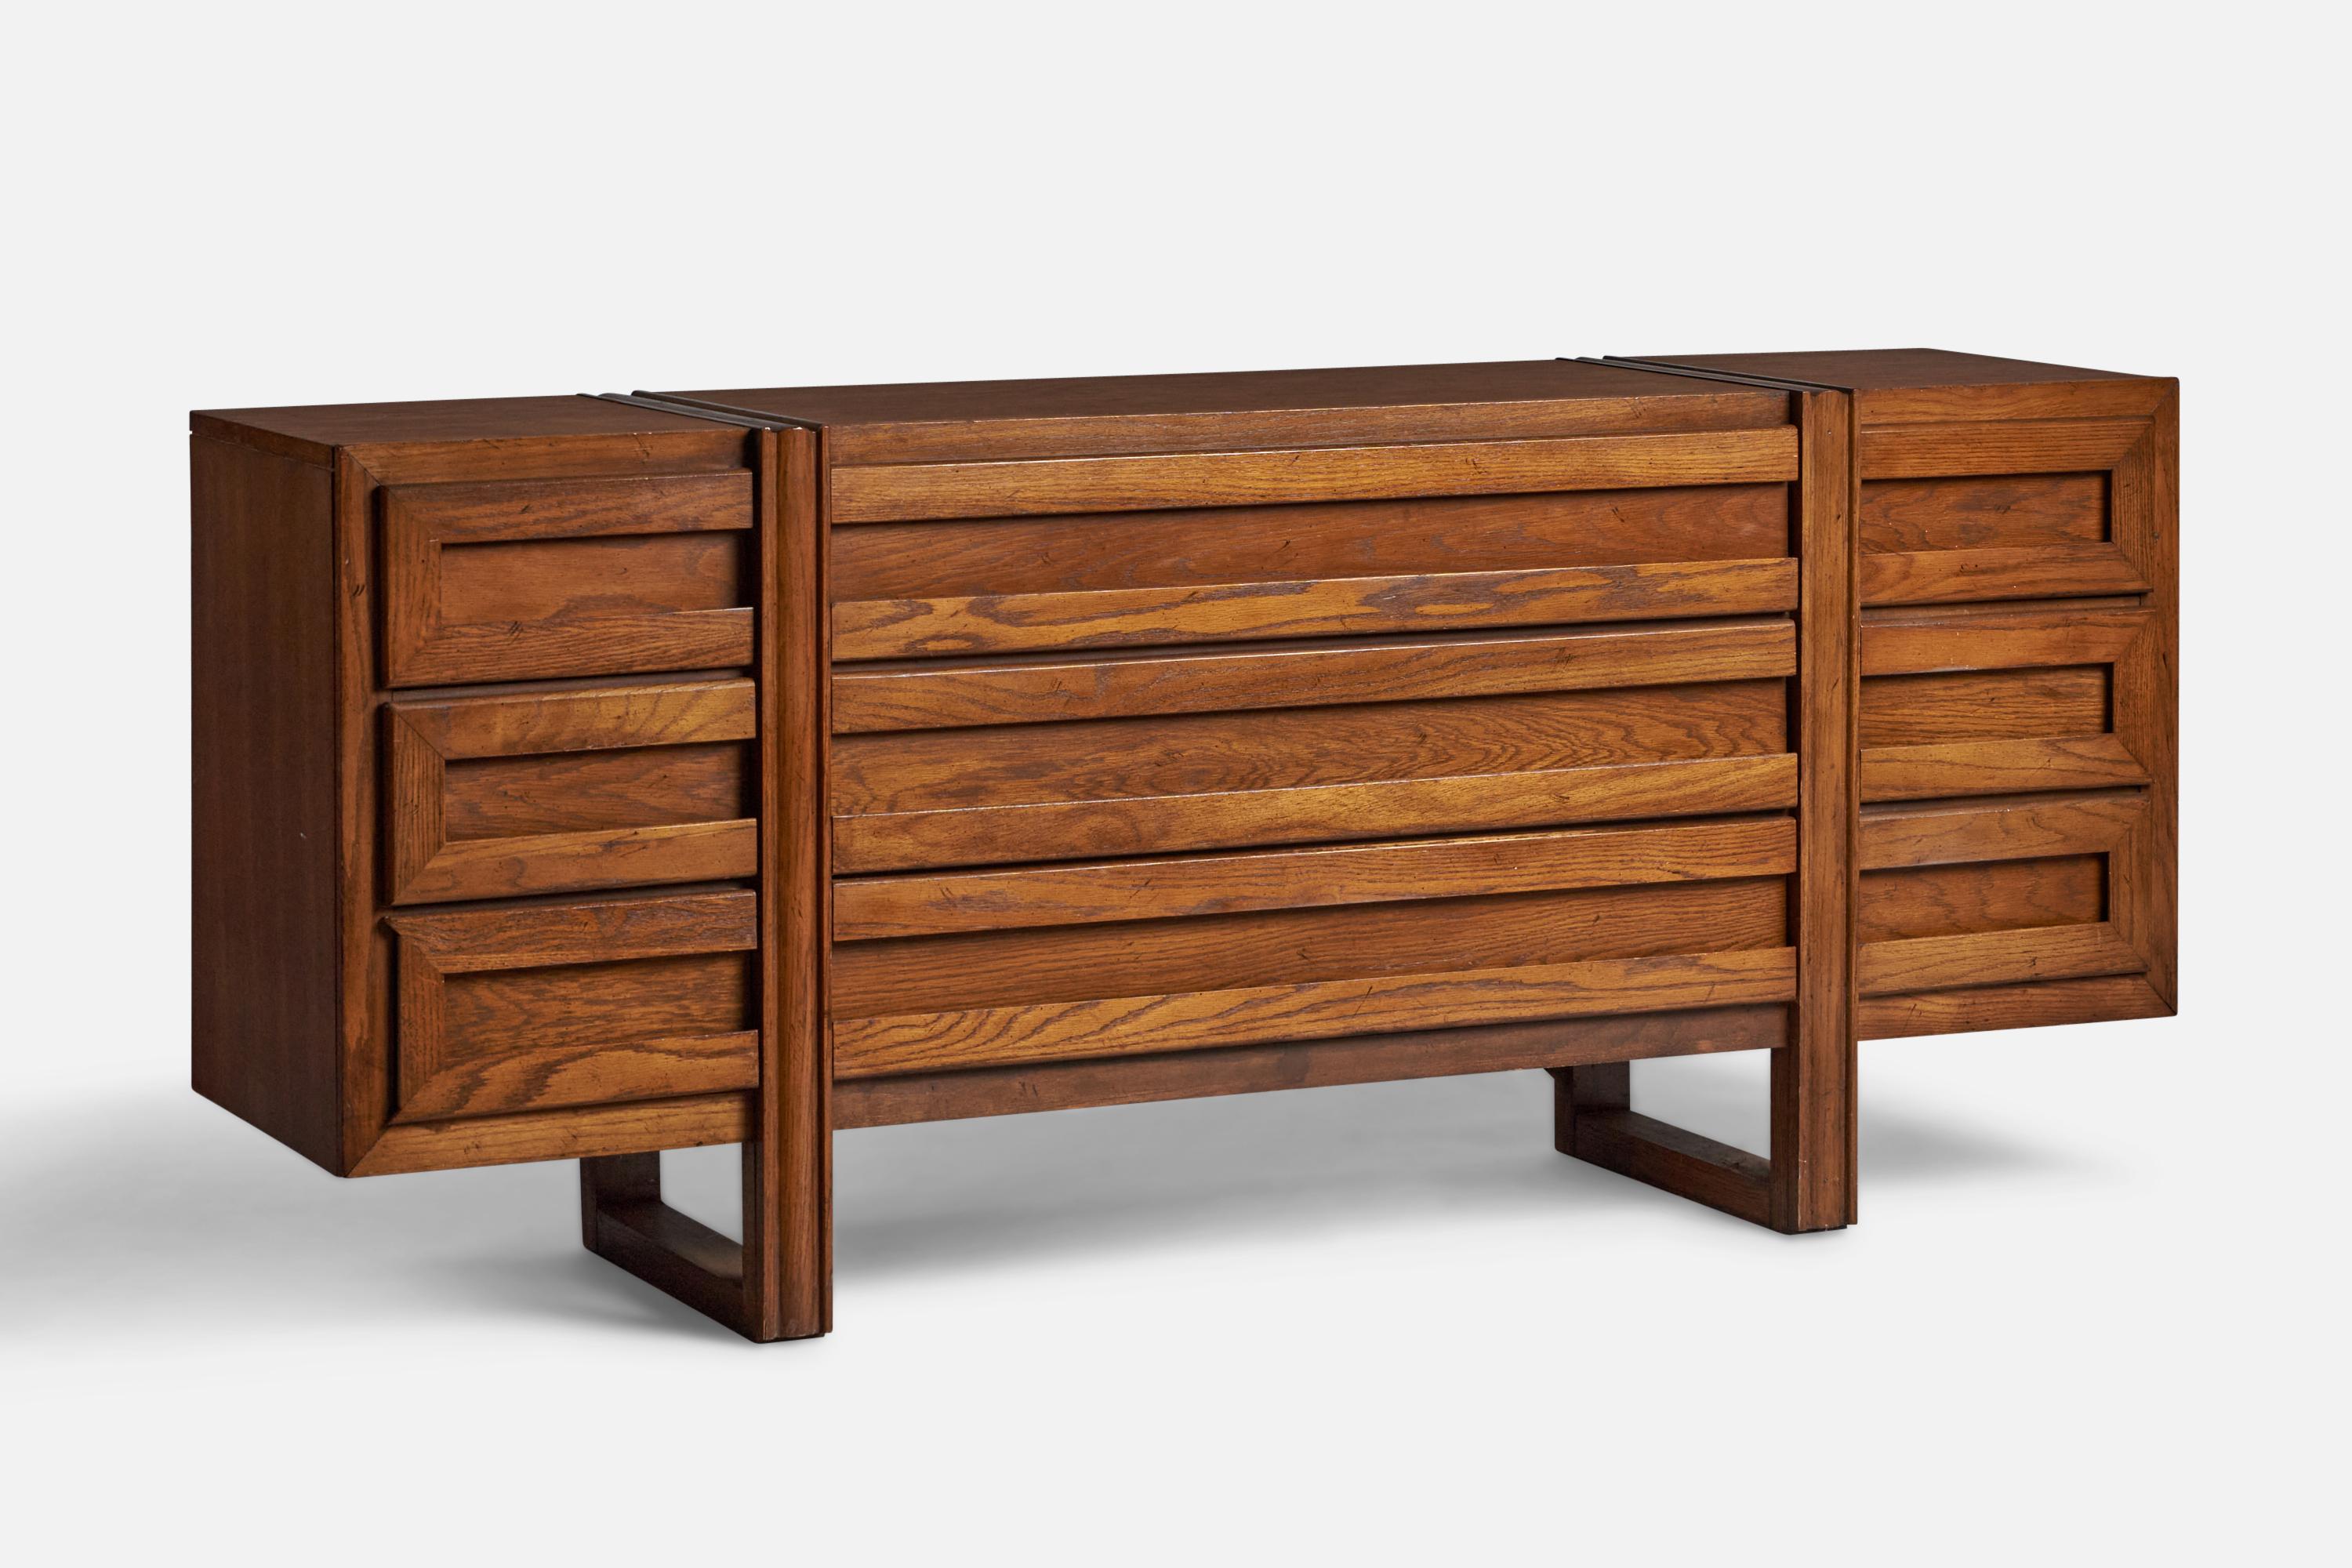 A stained walnut dresser or commode designed and produced in the US, 1950s.